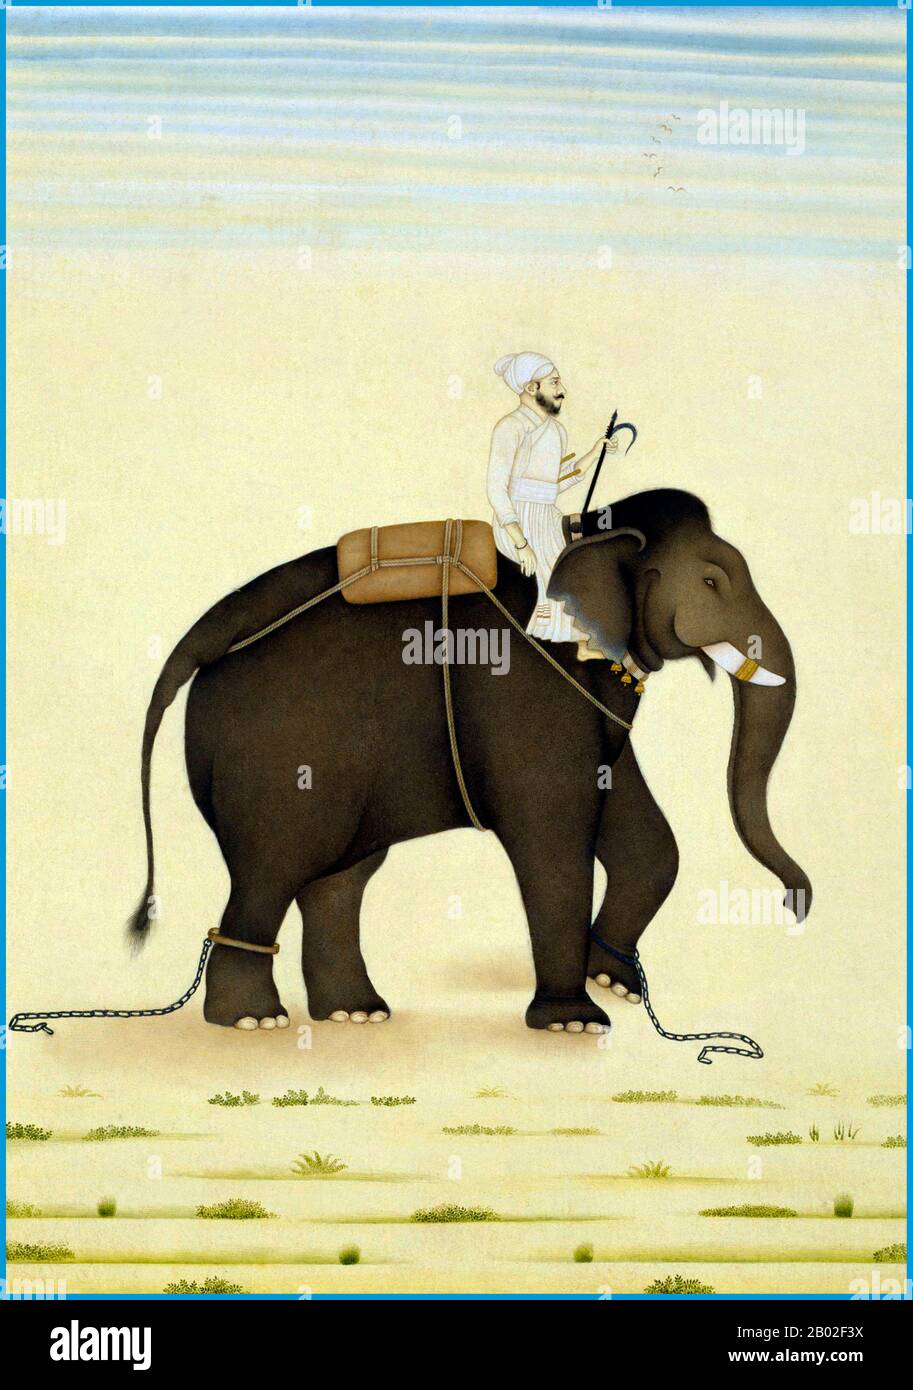 The Indian Elephant (Elephas maximus indicus) is one of three recognized subspecies of the Asian elephant, and native to mainland Asia.  In general, Asian elephants are smaller than African elephants and have the highest body point on the head. The tip of their trunk has one finger-like process. Their back is convex or level. Indian elephants reach a shoulder height of between 2 and 3.5 m (6.6 and 11.5 ft), weigh between 2,000 and 5,000 kg (4,400 and 11,000 lb), and have 19 pairs of ribs. Their skin color is lighter than of maximus with smaller patches of depigmentation, but darker than of sum Stock Photo